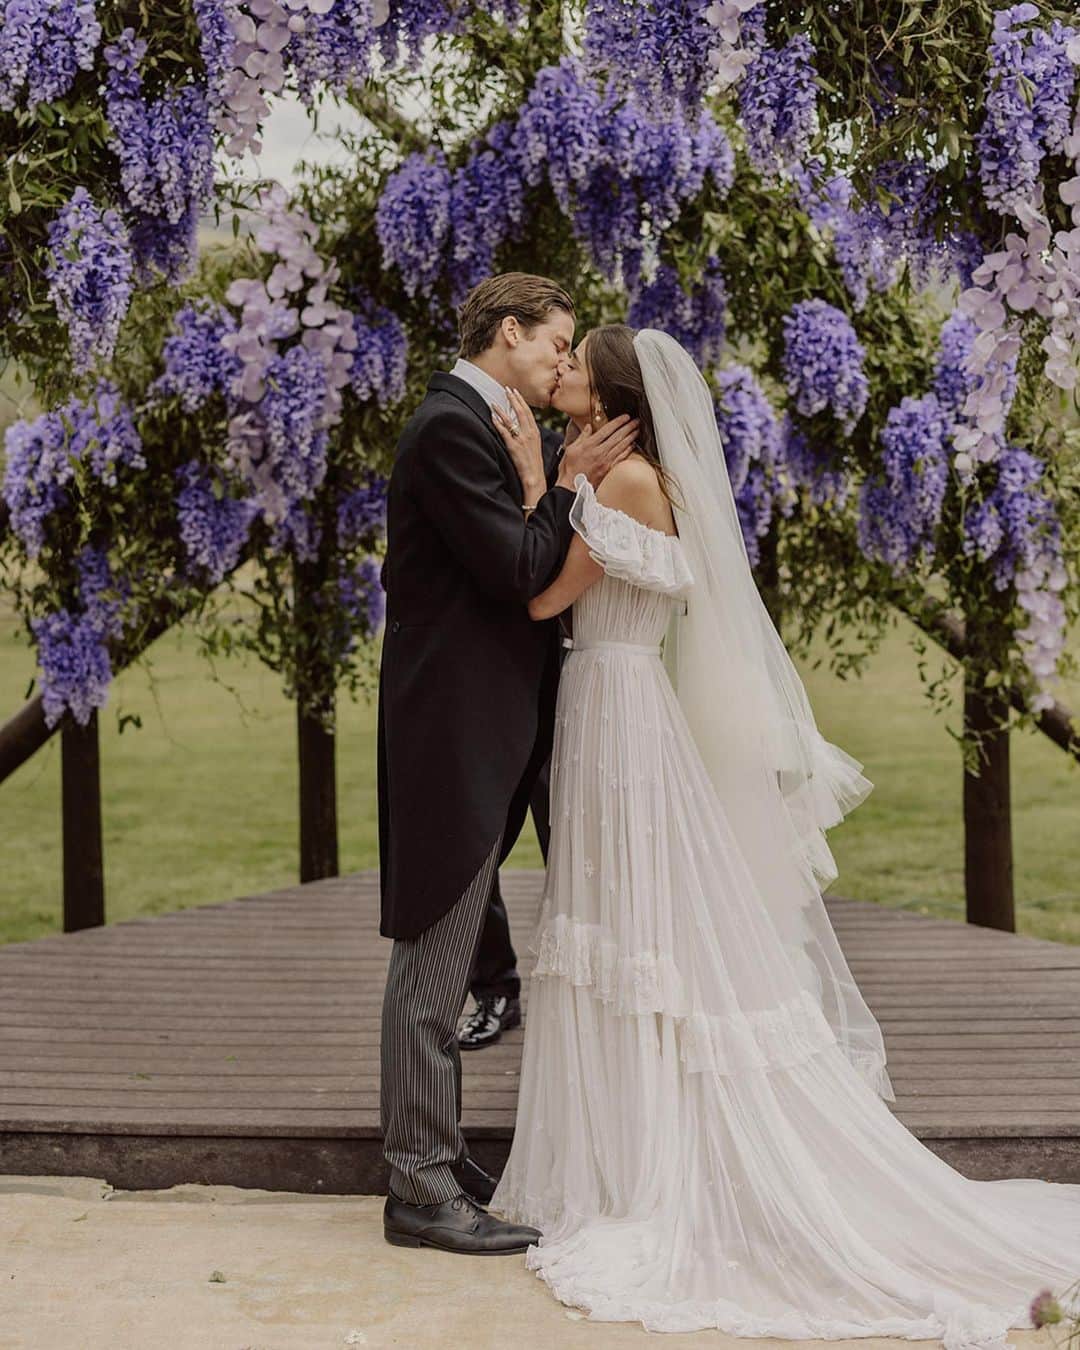 テイラー・ヒルのインスタグラム：「June 10th I got to married to the love of my life and my best friend in my hometown, it was a magical fairytale and my dream wedding ✨💜🤍 I want to say thank you to everyone who made it happen. My wedding planner Hannah Peterson of @table6productions knocked it out the park. Thank you Hannah for keeping everything together and making sure the day went smoothly. @cedarandpines and @ravenrosefilms you are such amazing and talented people. Without you, these images that I will cherish for the rest of my life, wouldn’t exist. Thank you for making our special day live on forever. The flowers were done by the insanely talented @theoliveandpoppy and I had a big floral vision that was brought to life in the most beautiful way, even better than I could’ve imagined. And thank you @thesouthernloom for lending me your beautiful rugs for the ceremony. I have many of your rugs in my home and I wanted to feel the most at home during the wedding as I could, so it only made sense to have your rugs be apart of this day. And thank you @etro @marcodevincenzo and @marcocacchione for making the dress of my dreams. You saw my vision and created something more beautiful than I ever could’ve imagined and this dress felt so me, especially since I wanted to get married barefoot because I believe it makes me feel grounded and I wanted to be connected to the earth that I’m from. So thank you for seeing me as clearly as you did. There are so many more people to thank and I’ll probably be posting way too much but I’m just so grateful for everything and all the hard work that went into this weekend. ✨🤍」